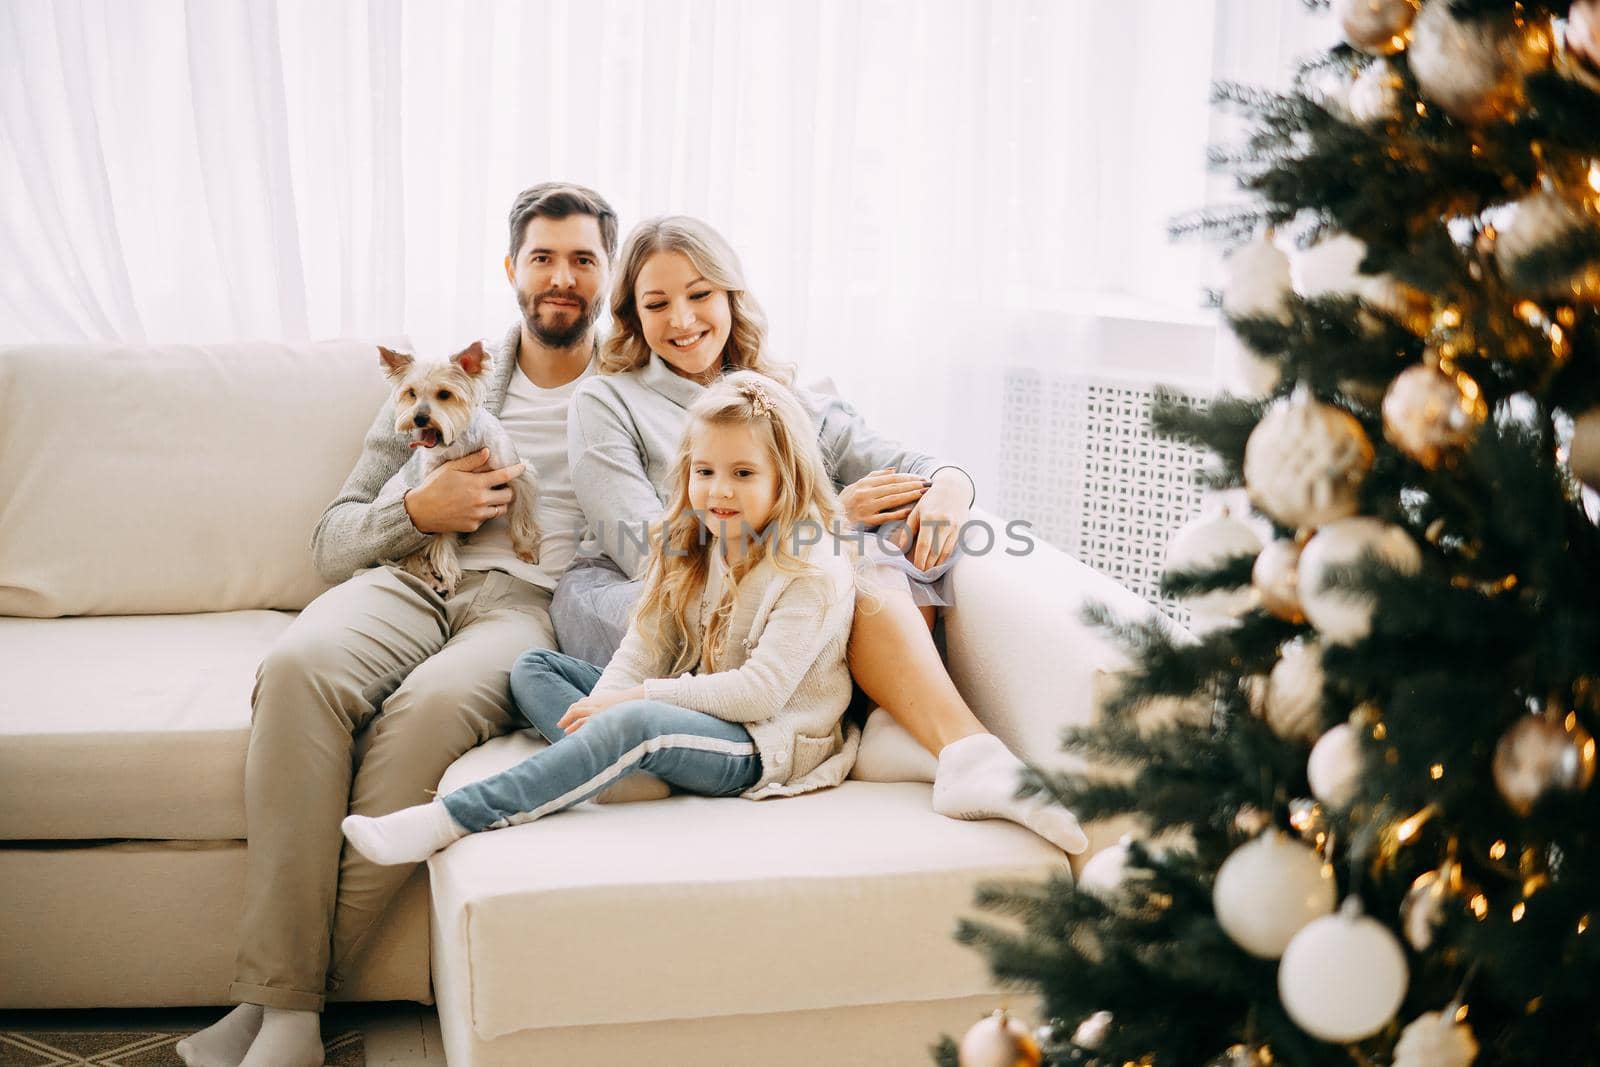 Happy family: mom, dad and pet. Family in a bright New Year's interior with a Christmas tree. by Annu1tochka